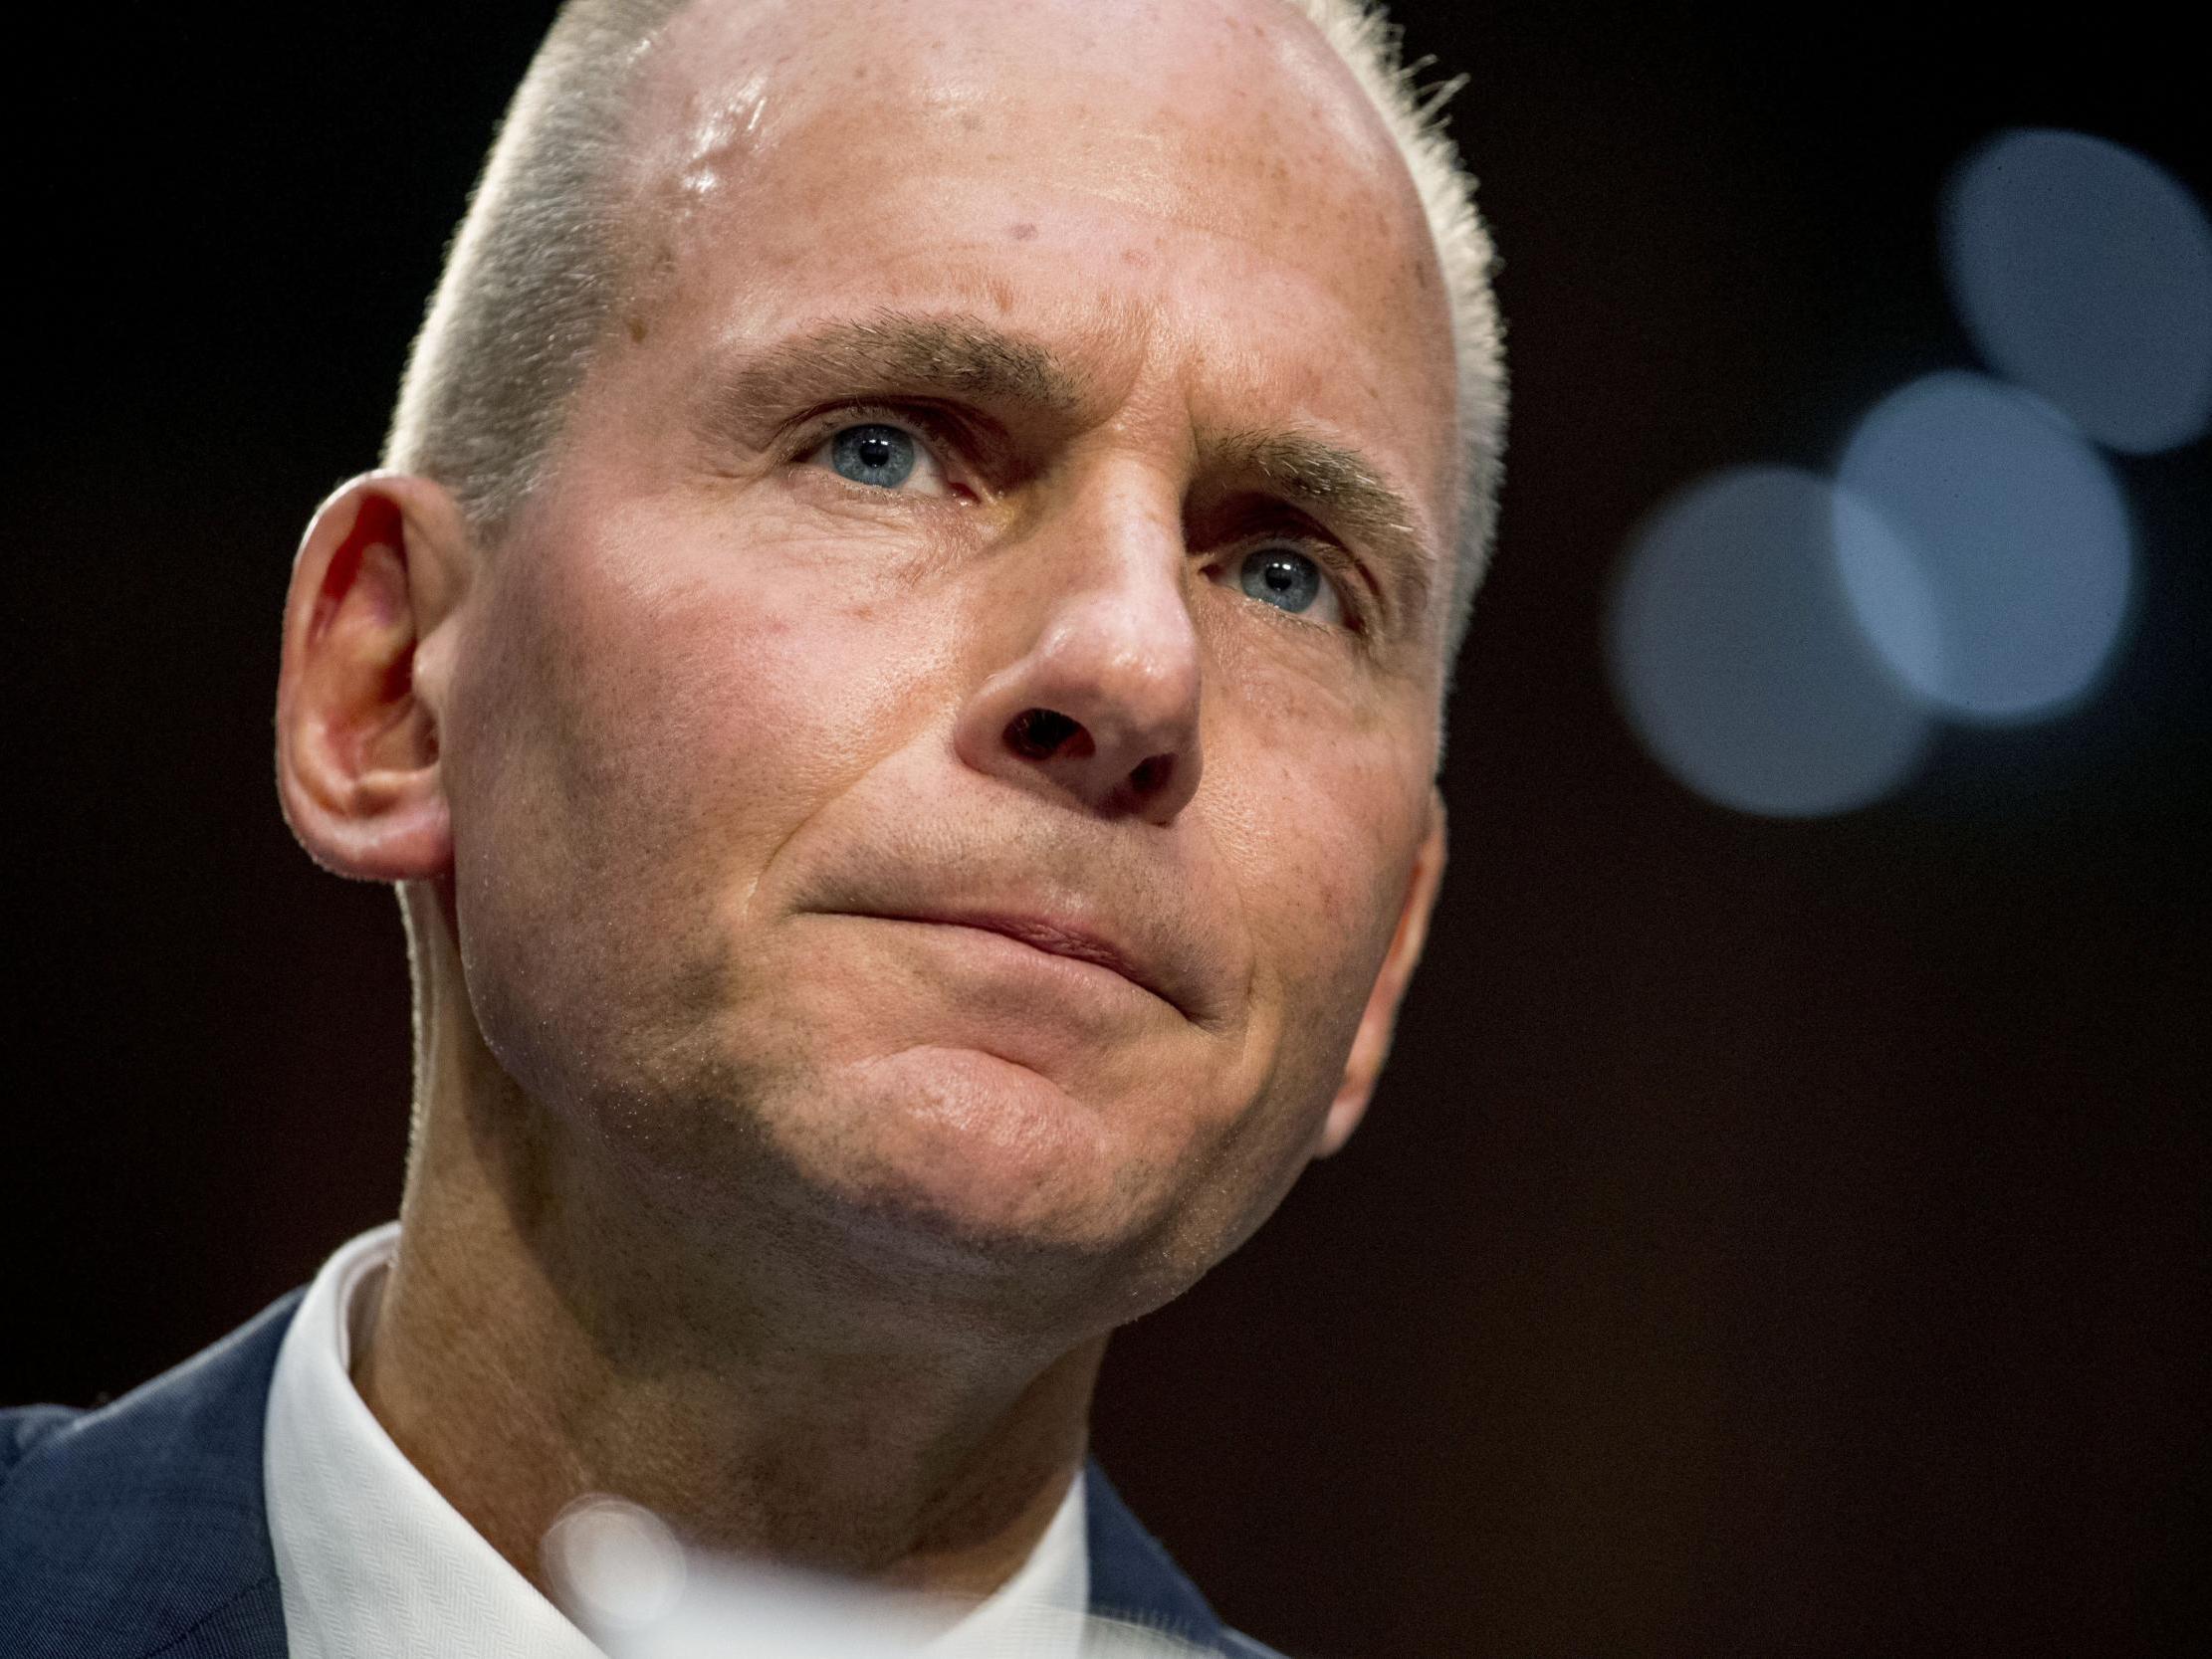 Dennis Muilenburg was forced out of his role as Boeing CEO last month